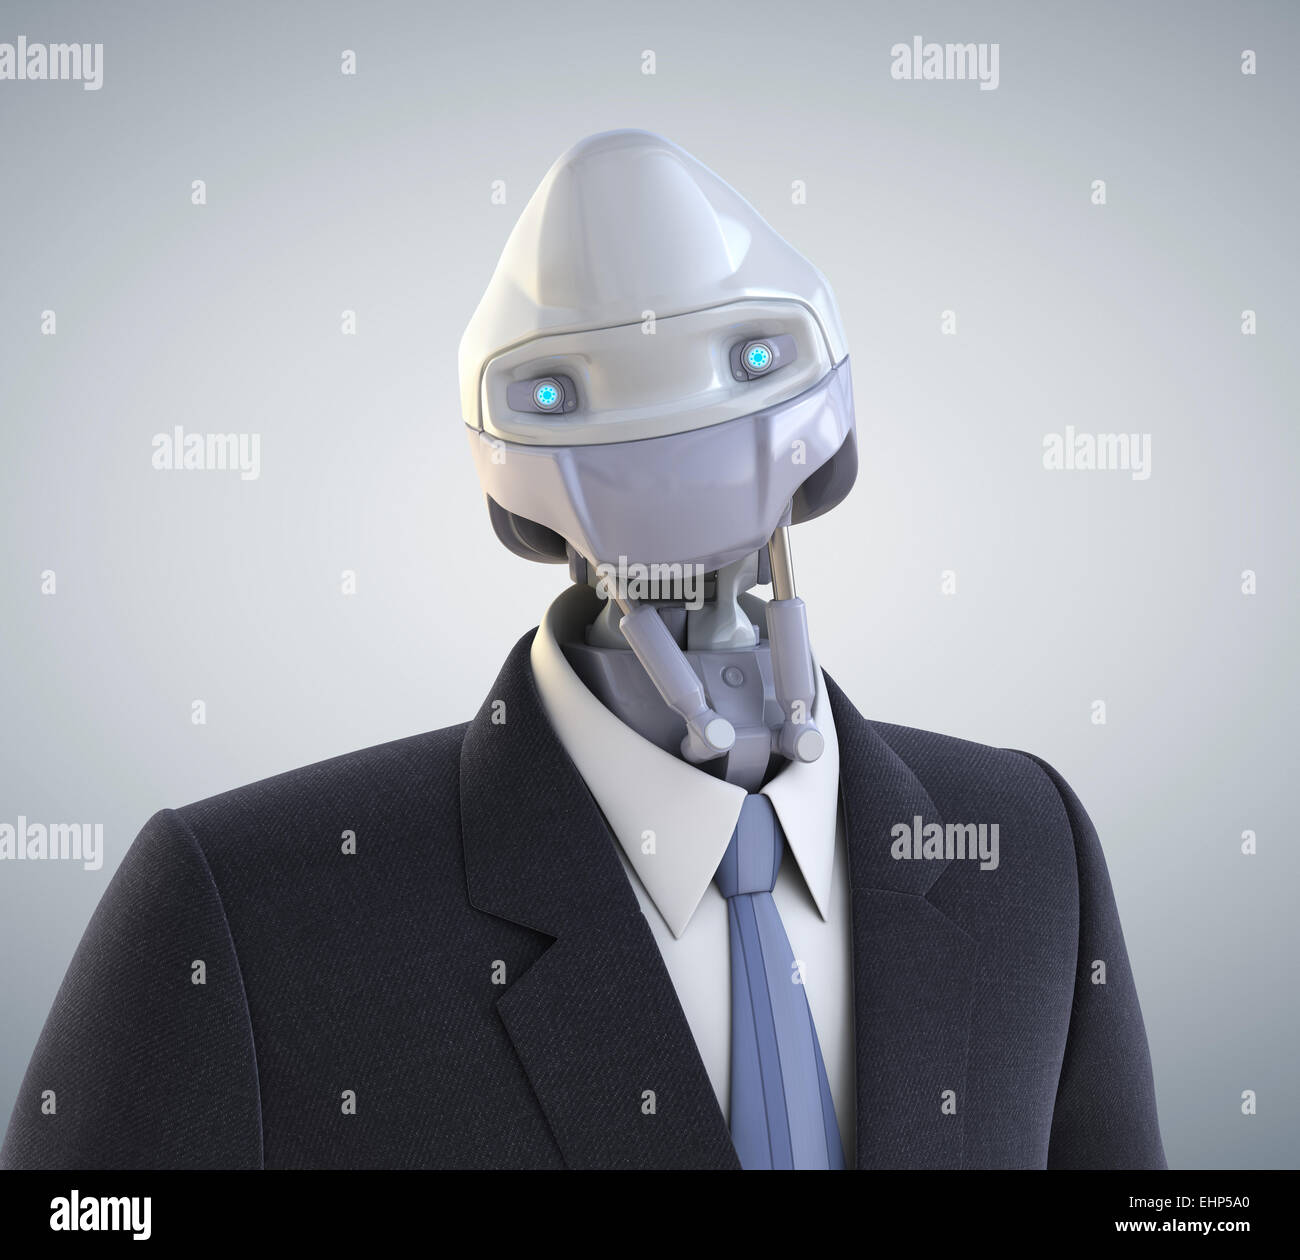 Robot dressed in a business suit. Clipping path included Stock Photo